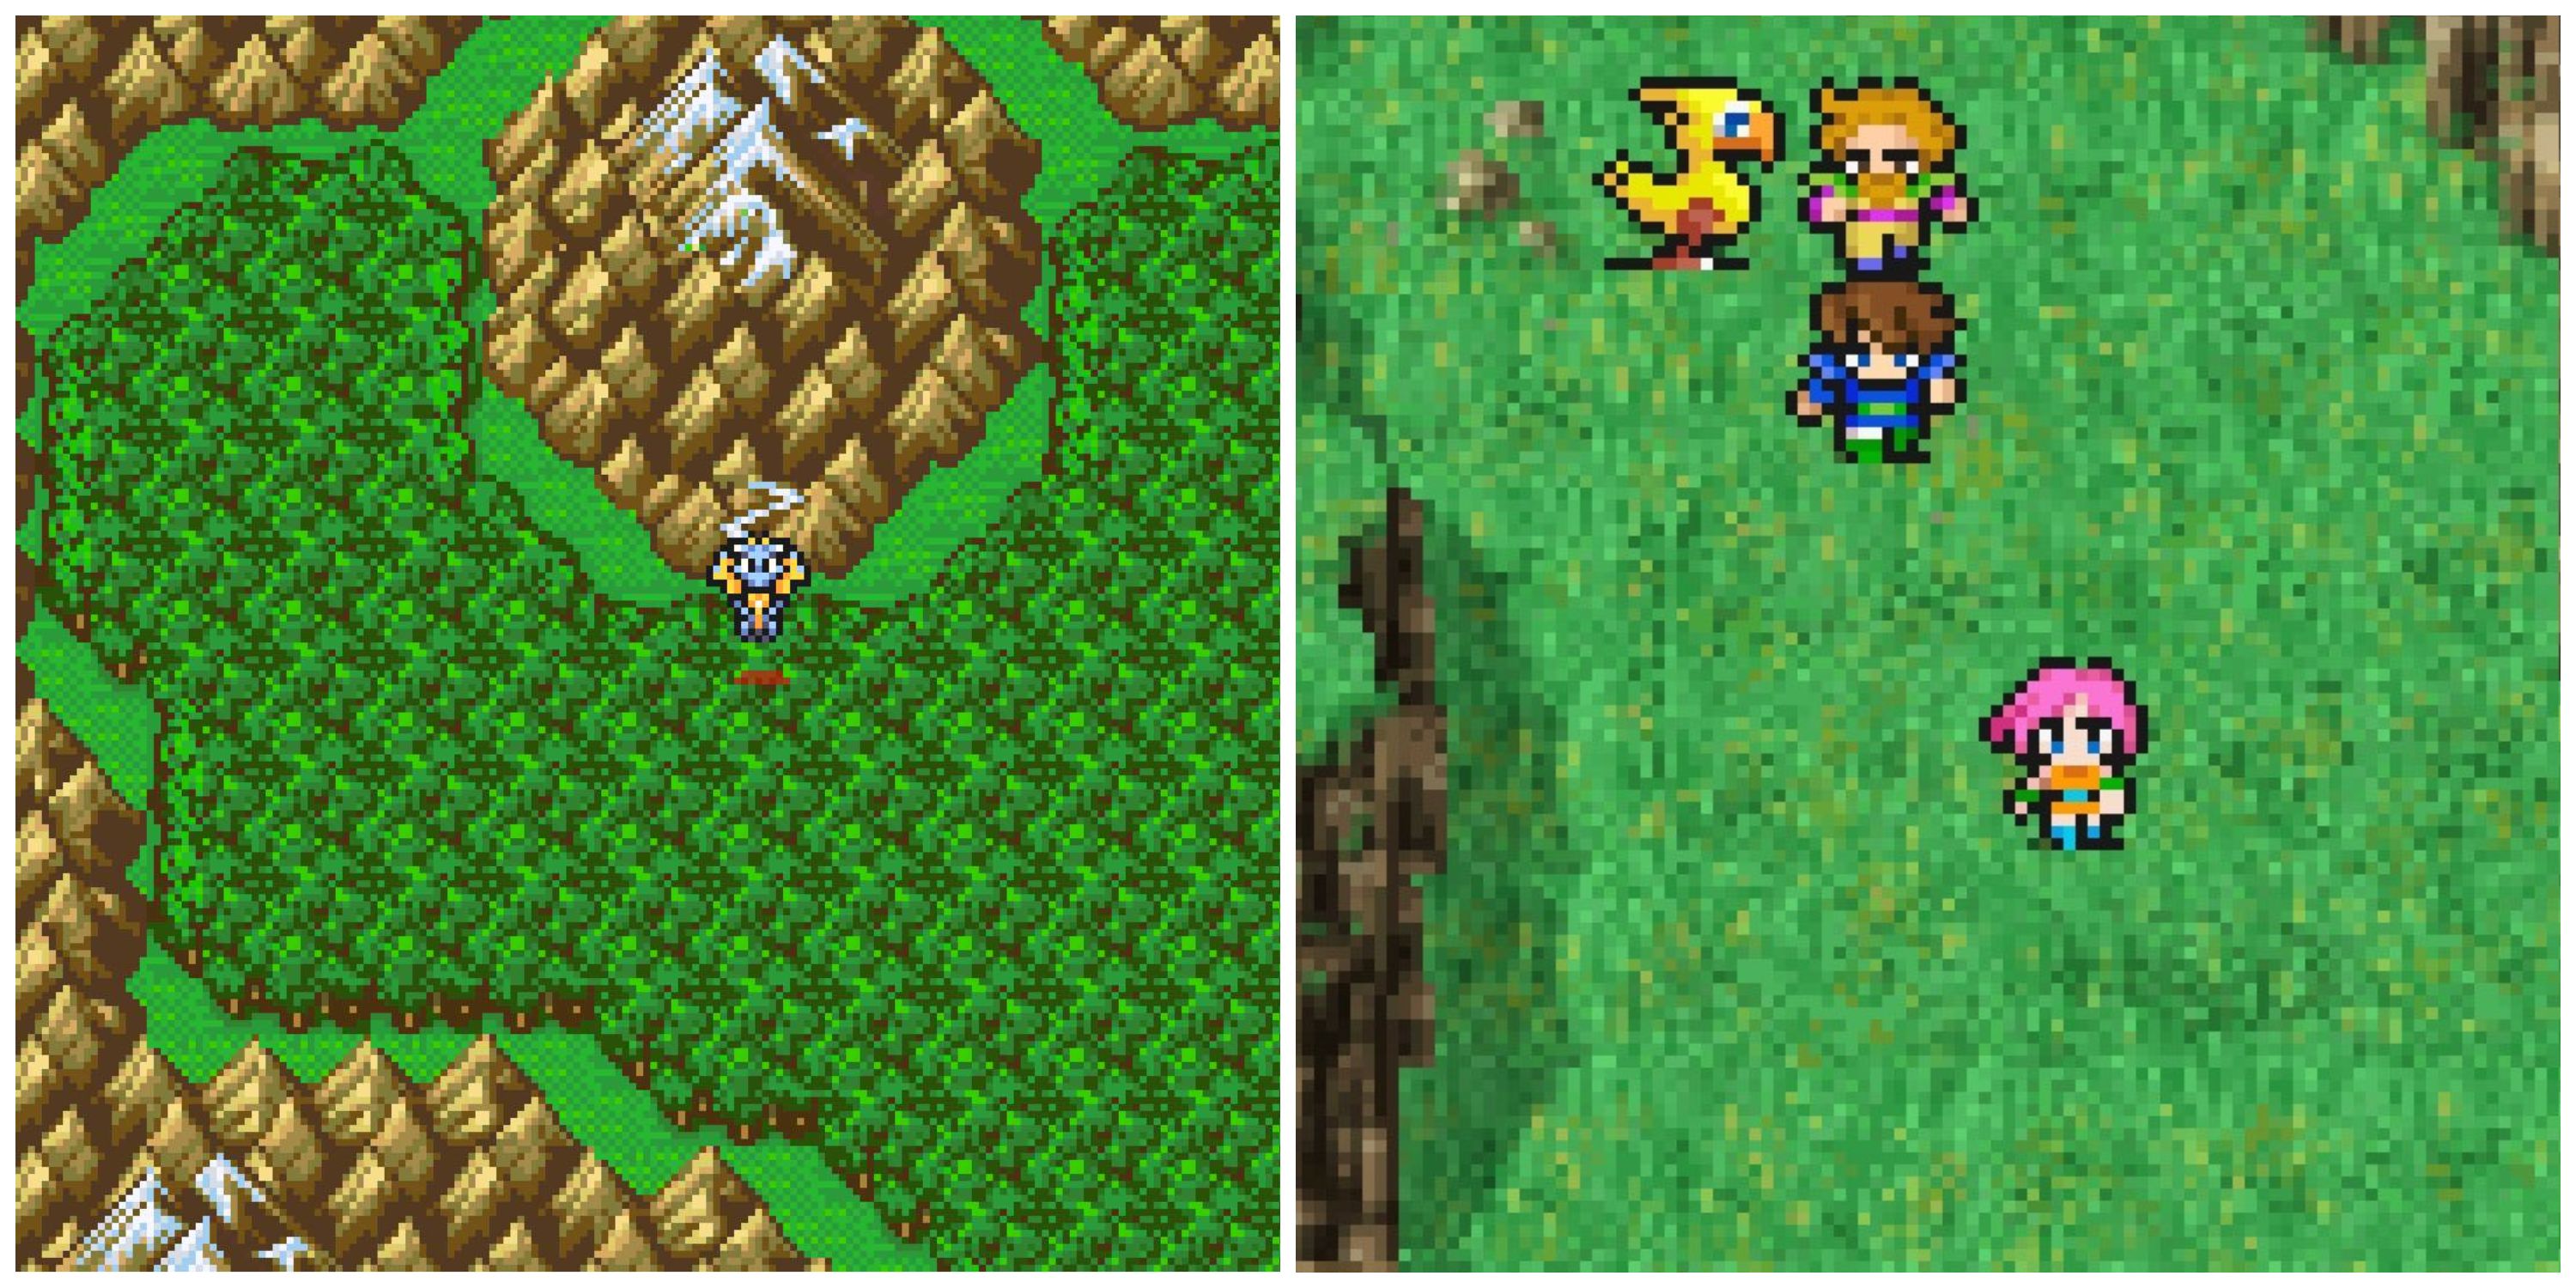 Things Final Fantasy 5 Does Better Than The Other Main Games